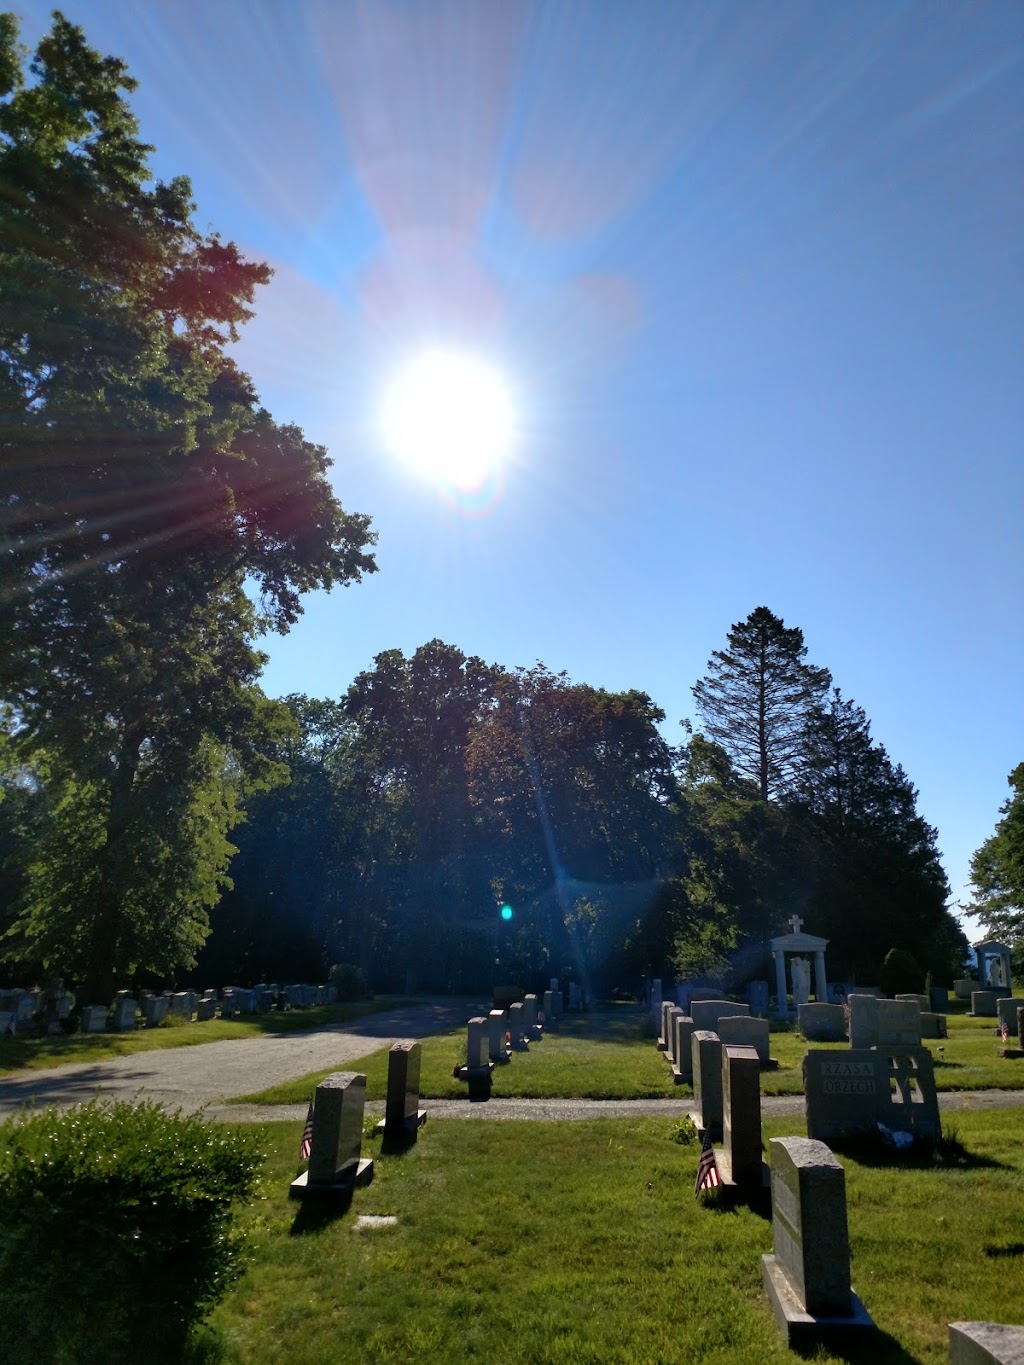 St Michaels Cemetery | Silver Hill Rd, Derby, CT 06418 | Phone: (203) 734-0005